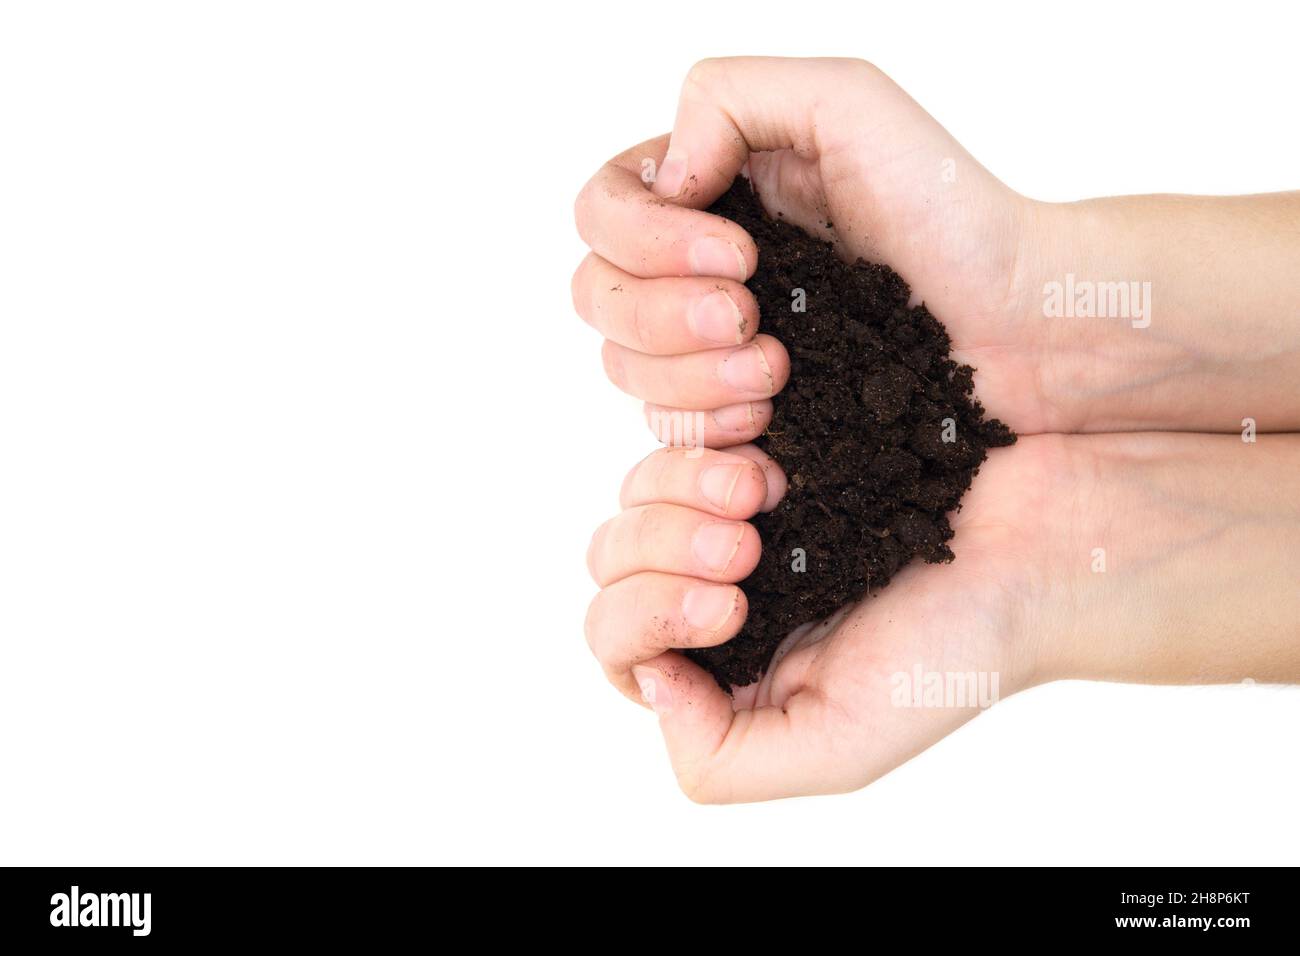 Heart symbol made of human hands holding soil isolated on white background. Stock Photo